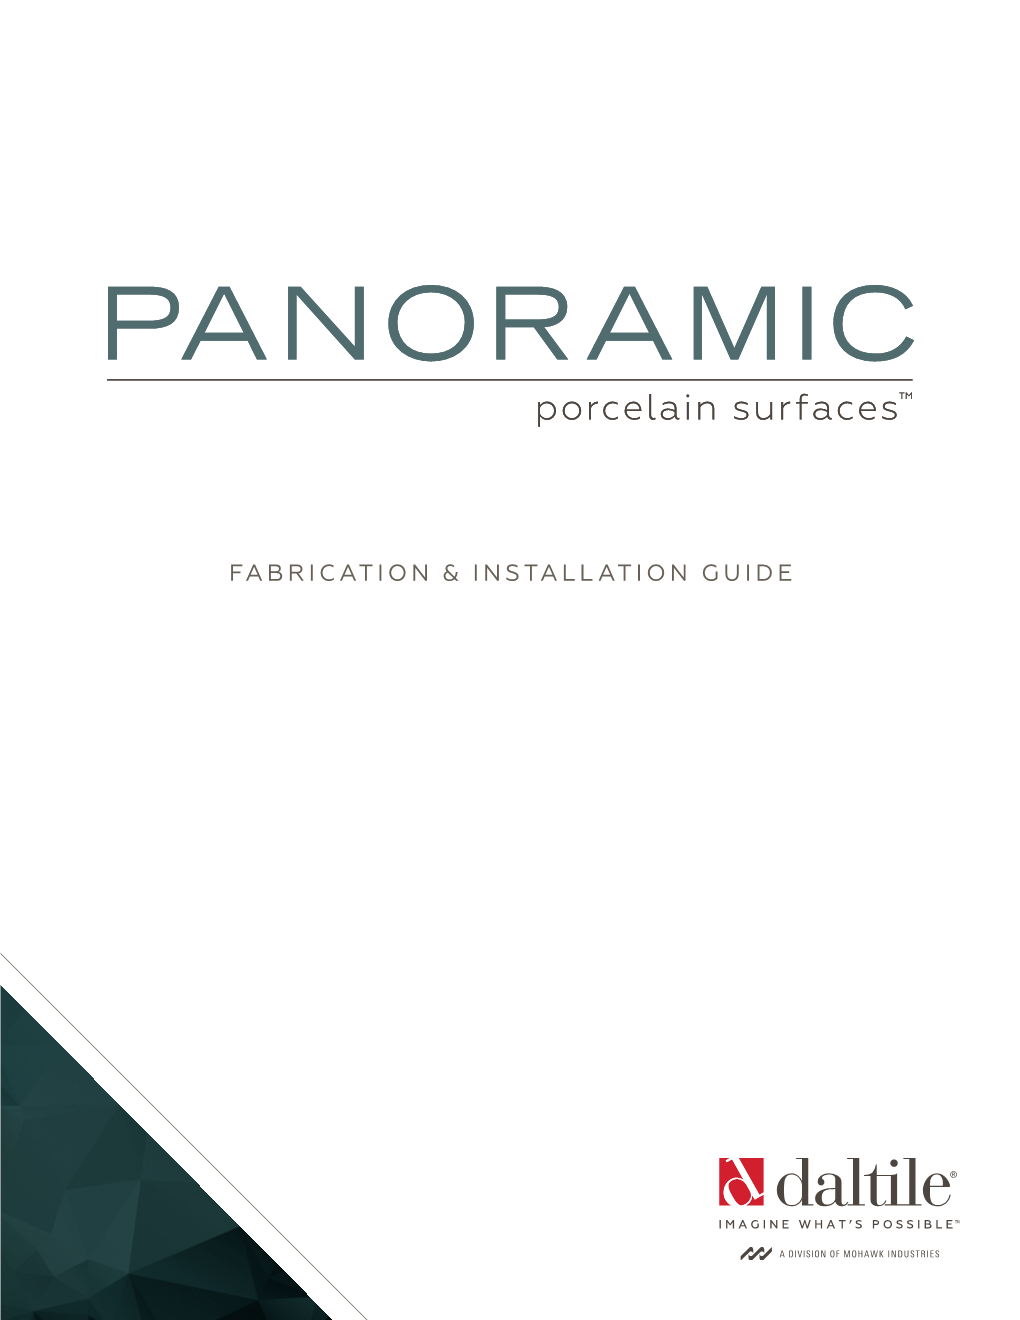 Panoramic Porcelain Surfaces Fabrication / Install Guide